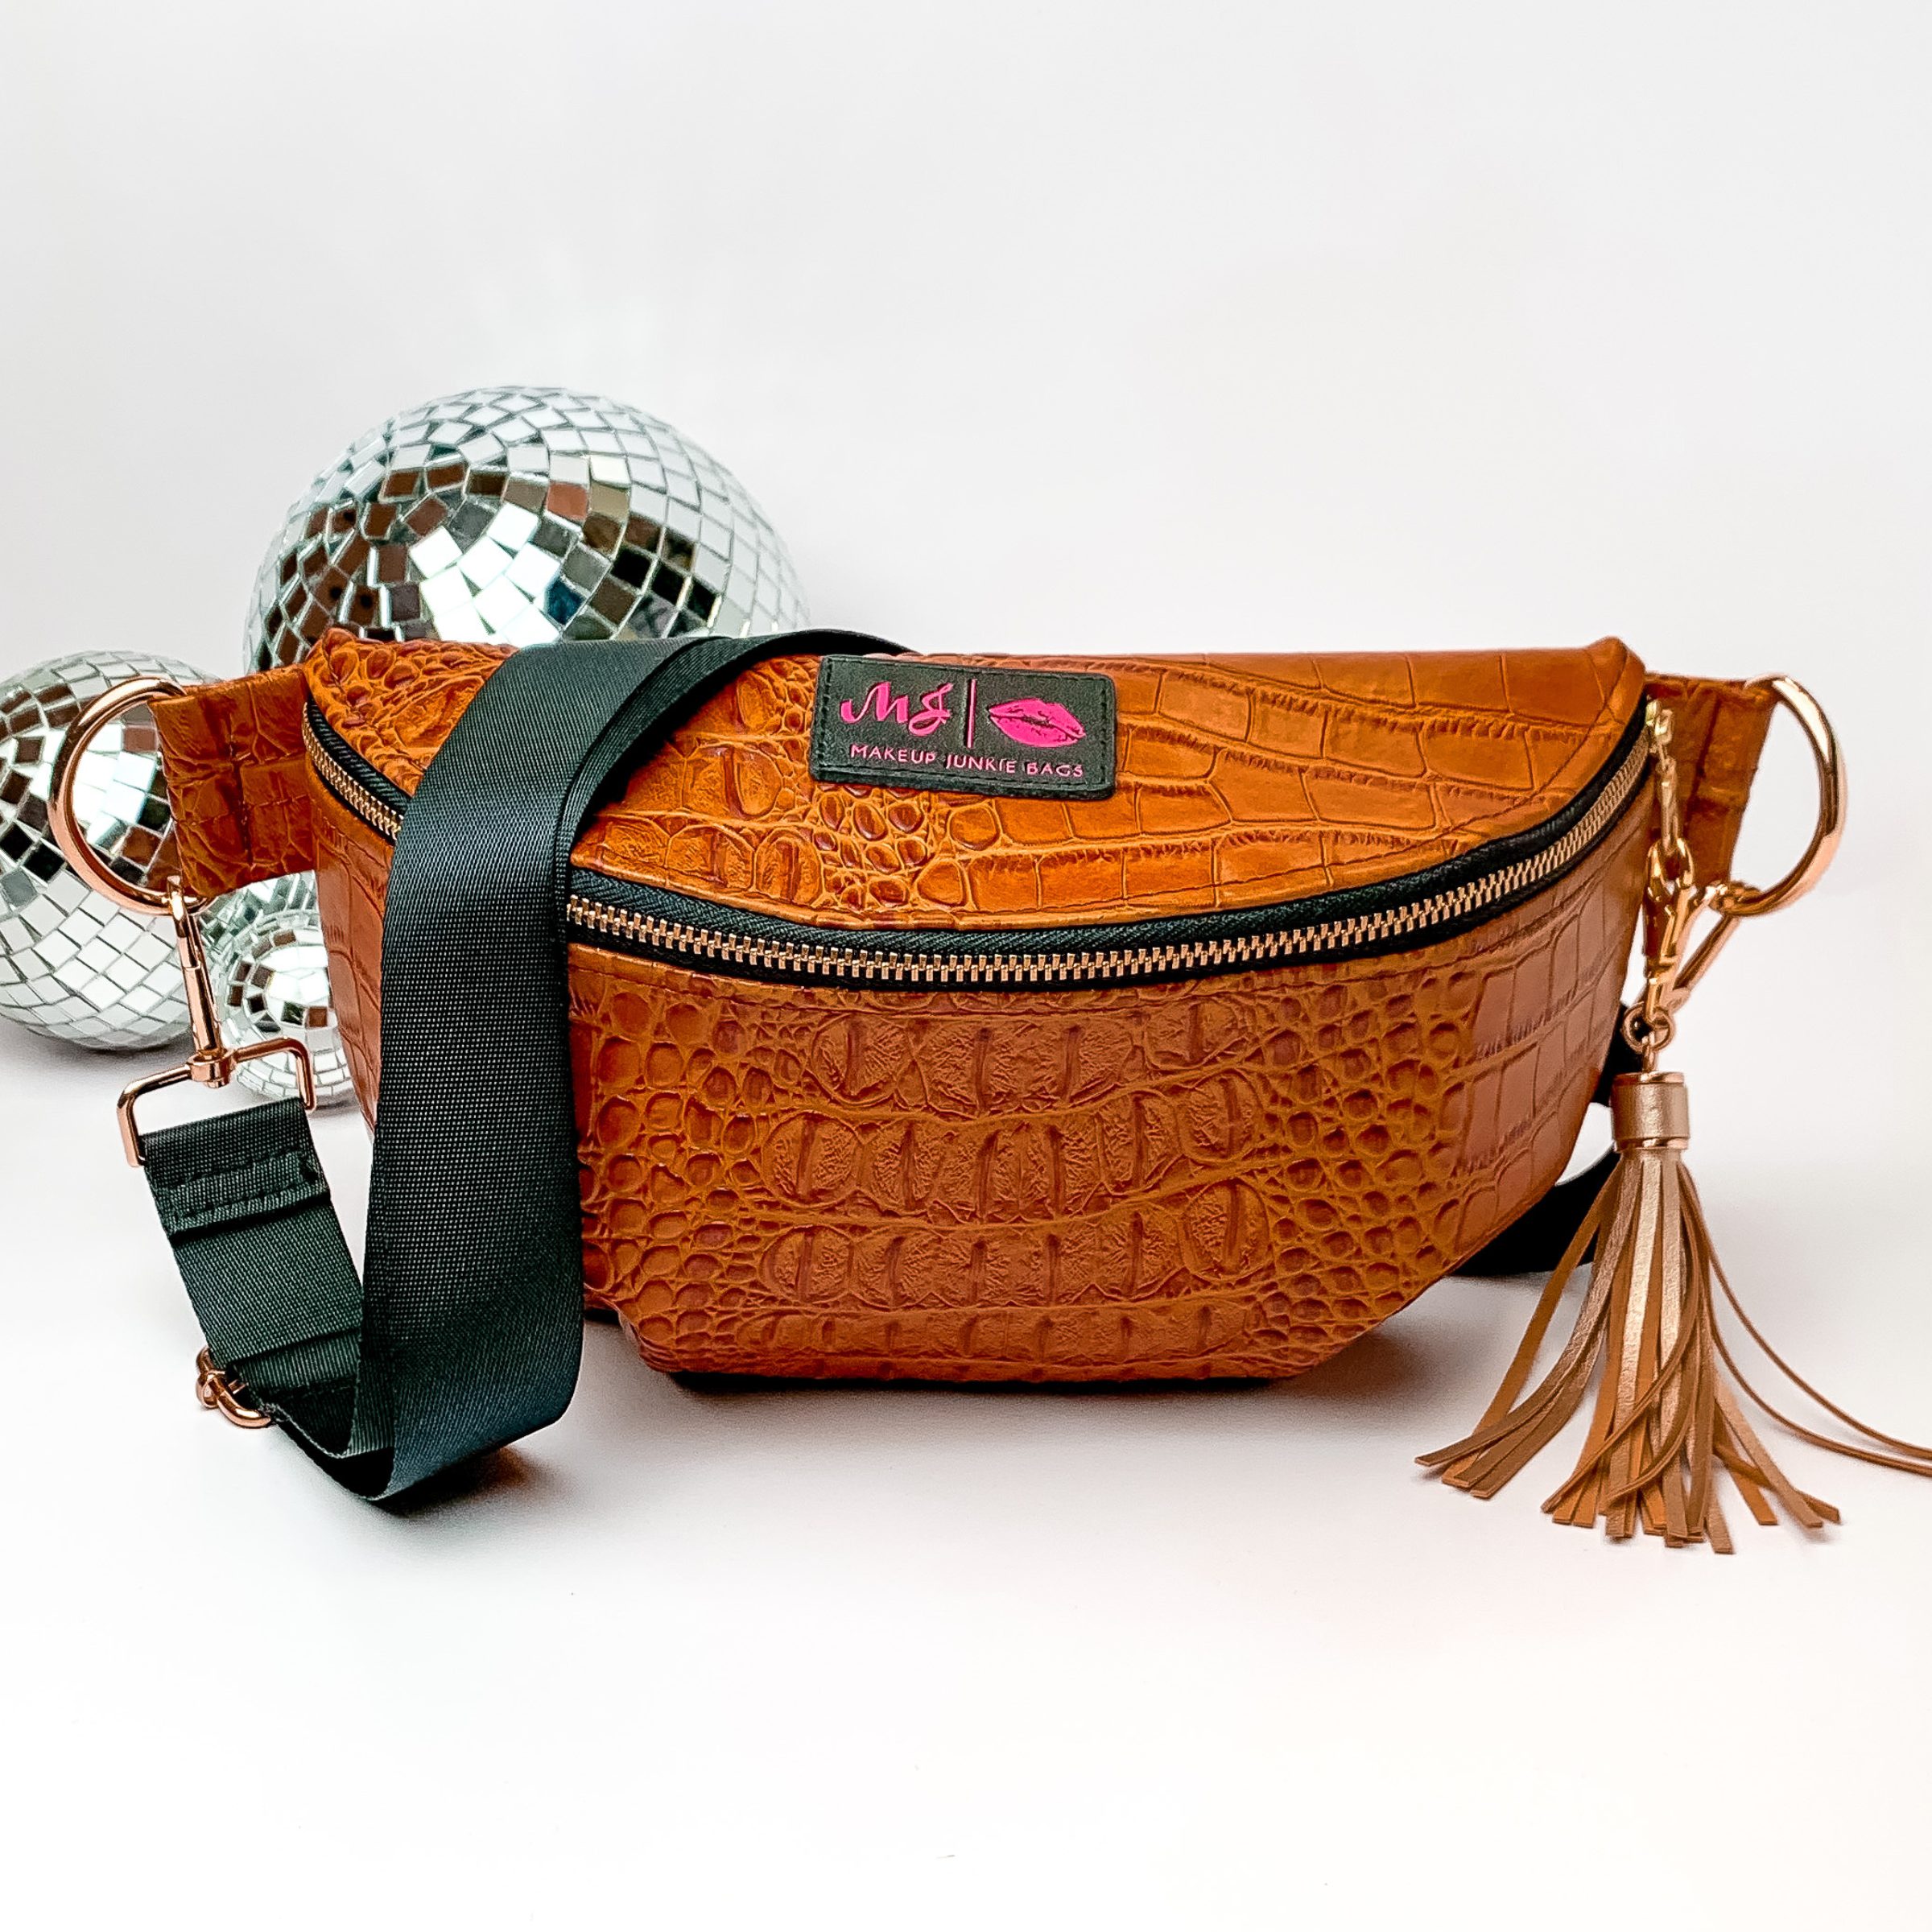 Tan, croc print fanny pack with a black strap. This bag includes gold accents, a gold zipper, and a gold tassel. This bag also has a pink stitched logo for Makeup Junkie. This fanny pack is pictured on a white background in front of disco balls. 